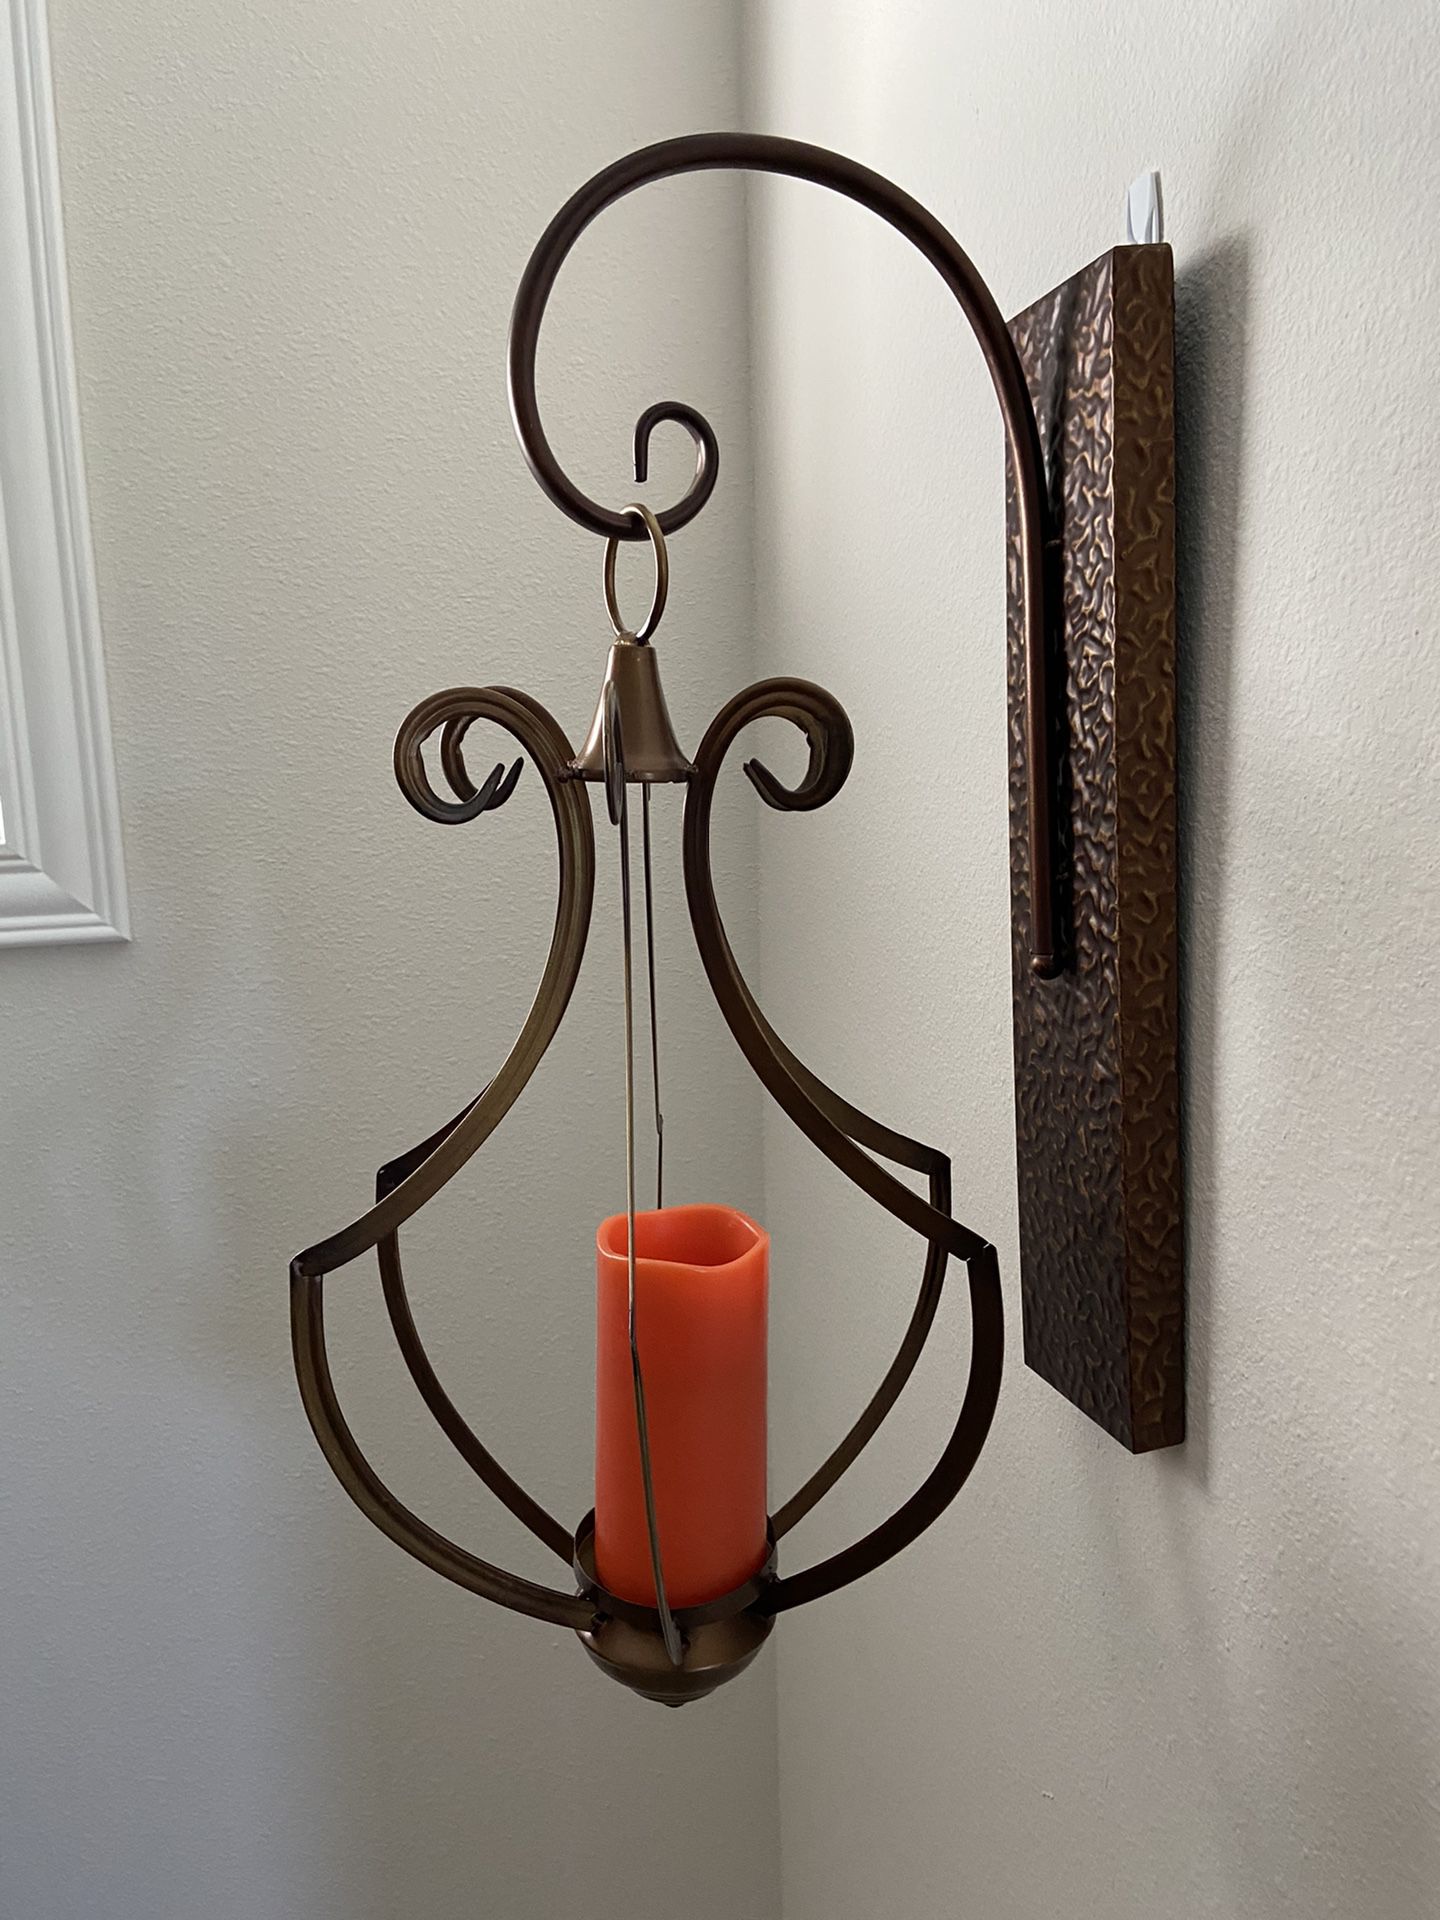 Wall candle sconces